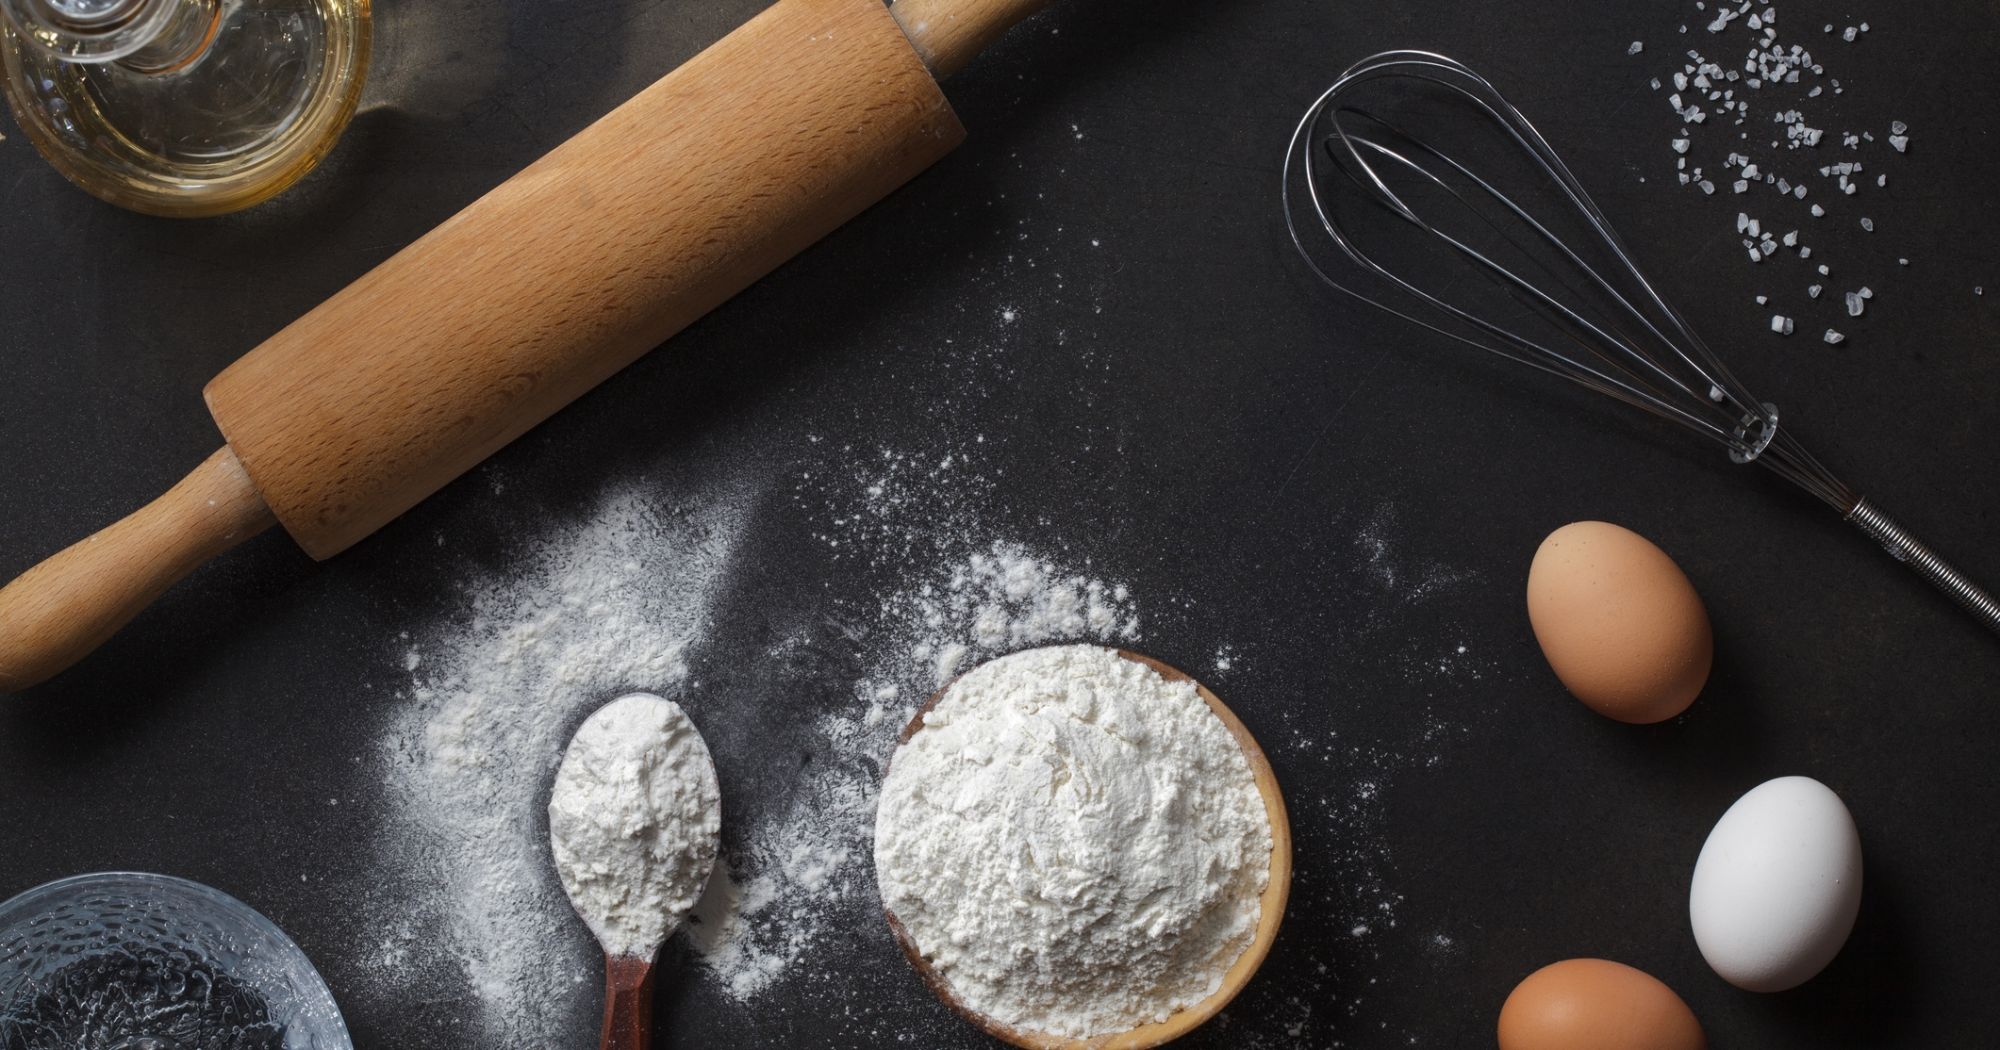 Bake Like A Pro: Our Top Eight Baking Tips To Improve Your Skills